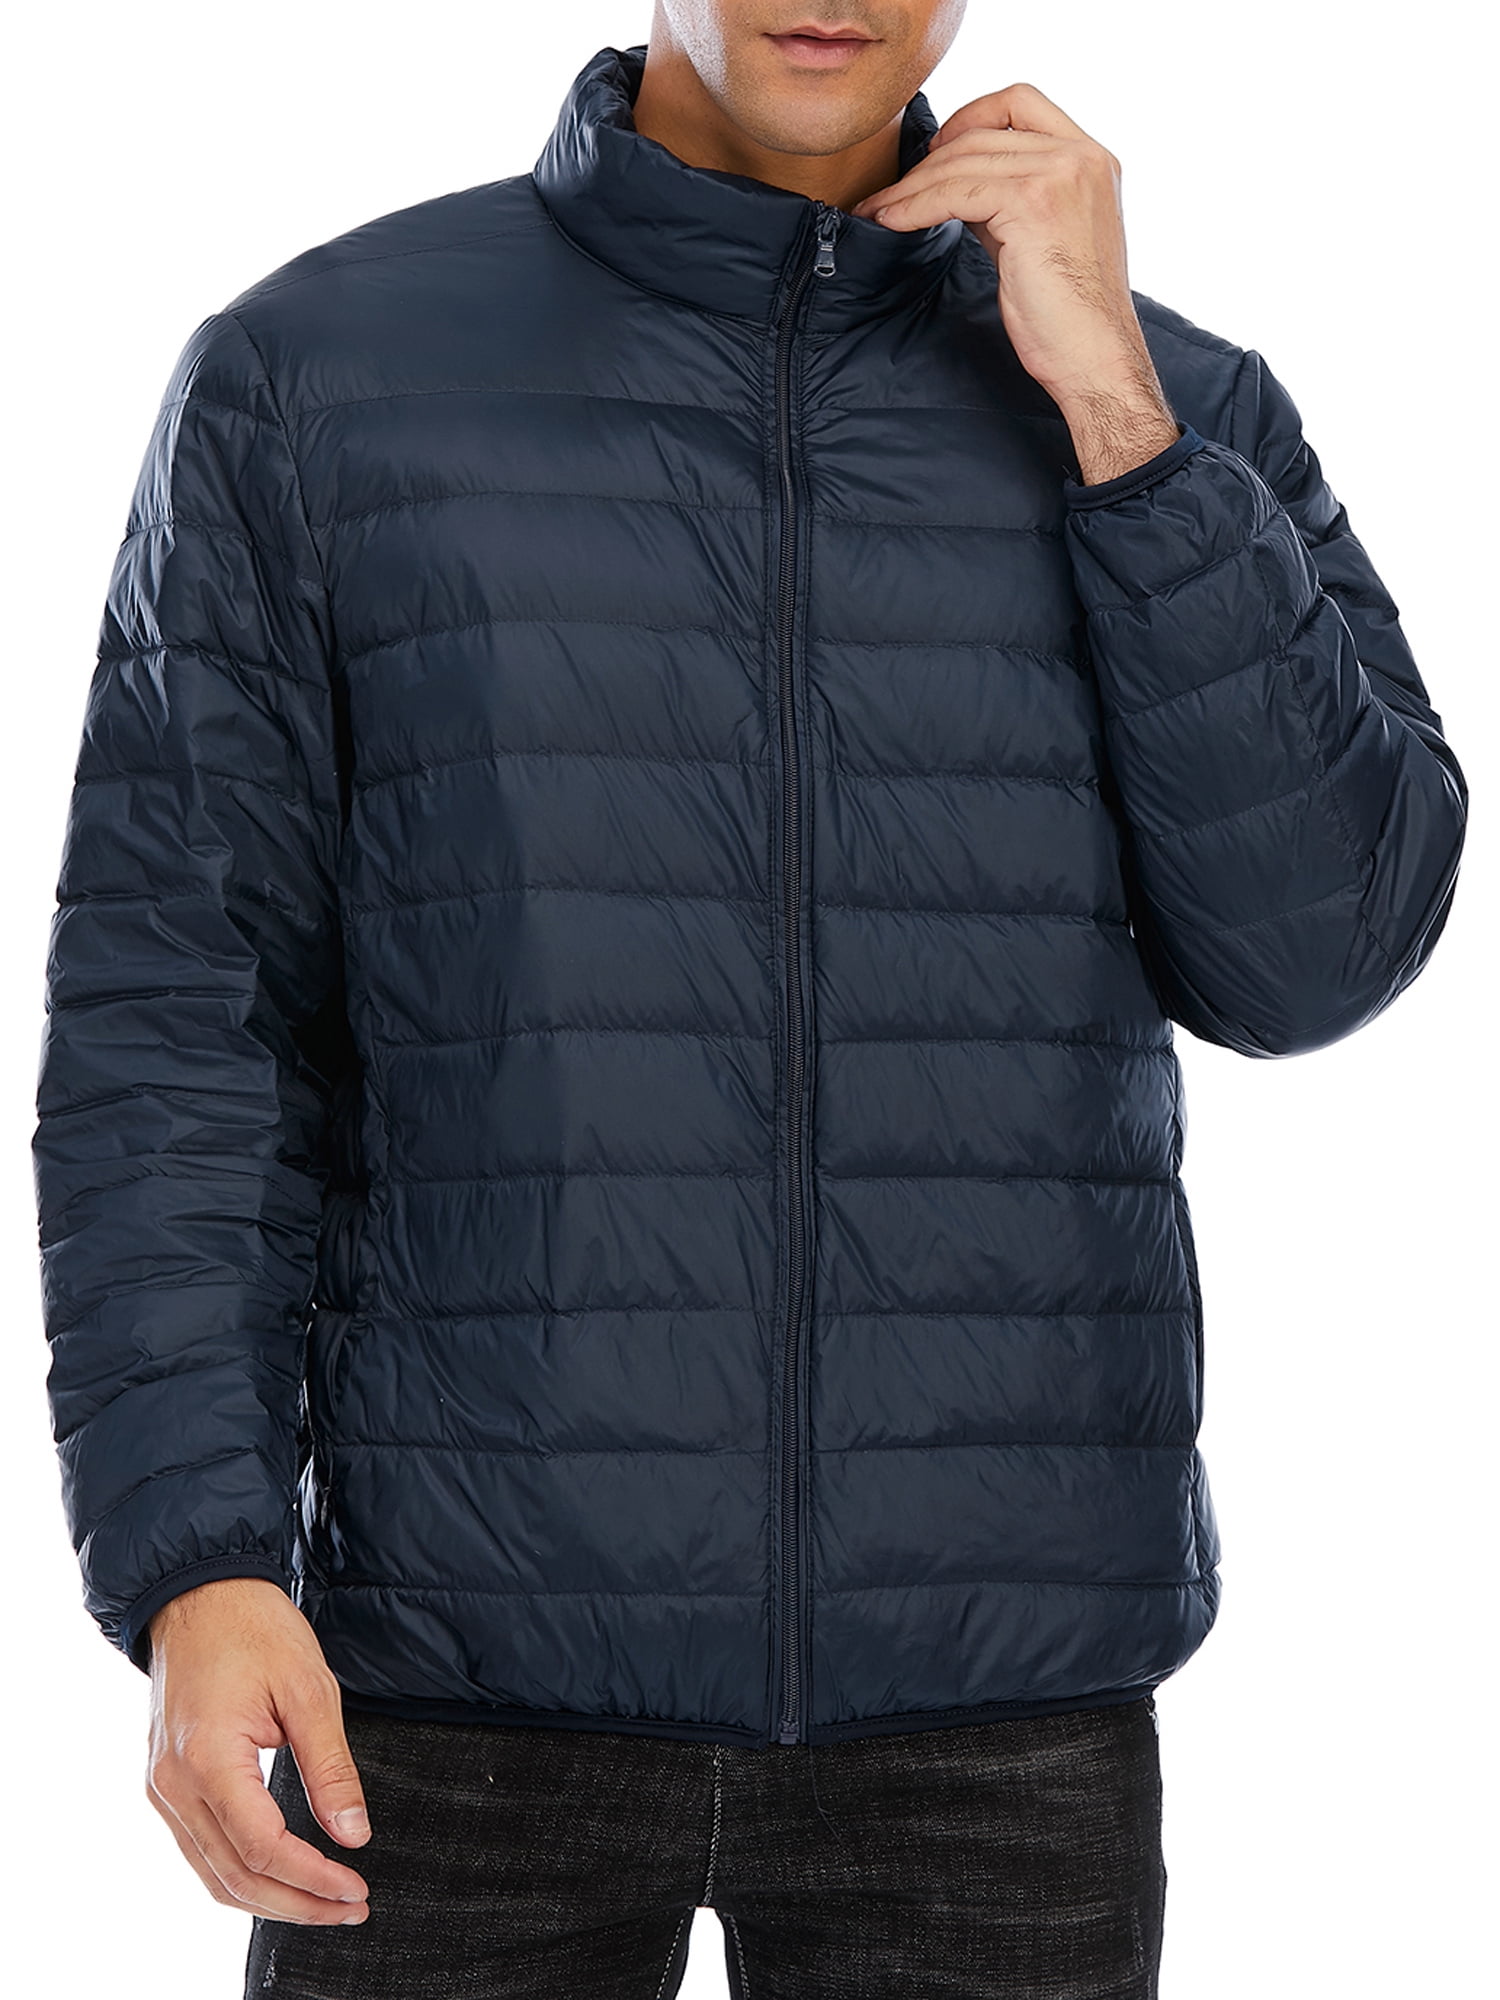 Soularge Men's Big and Tall Winter Water Resistant Hooded Puffer Coat  (Black, 4X) 